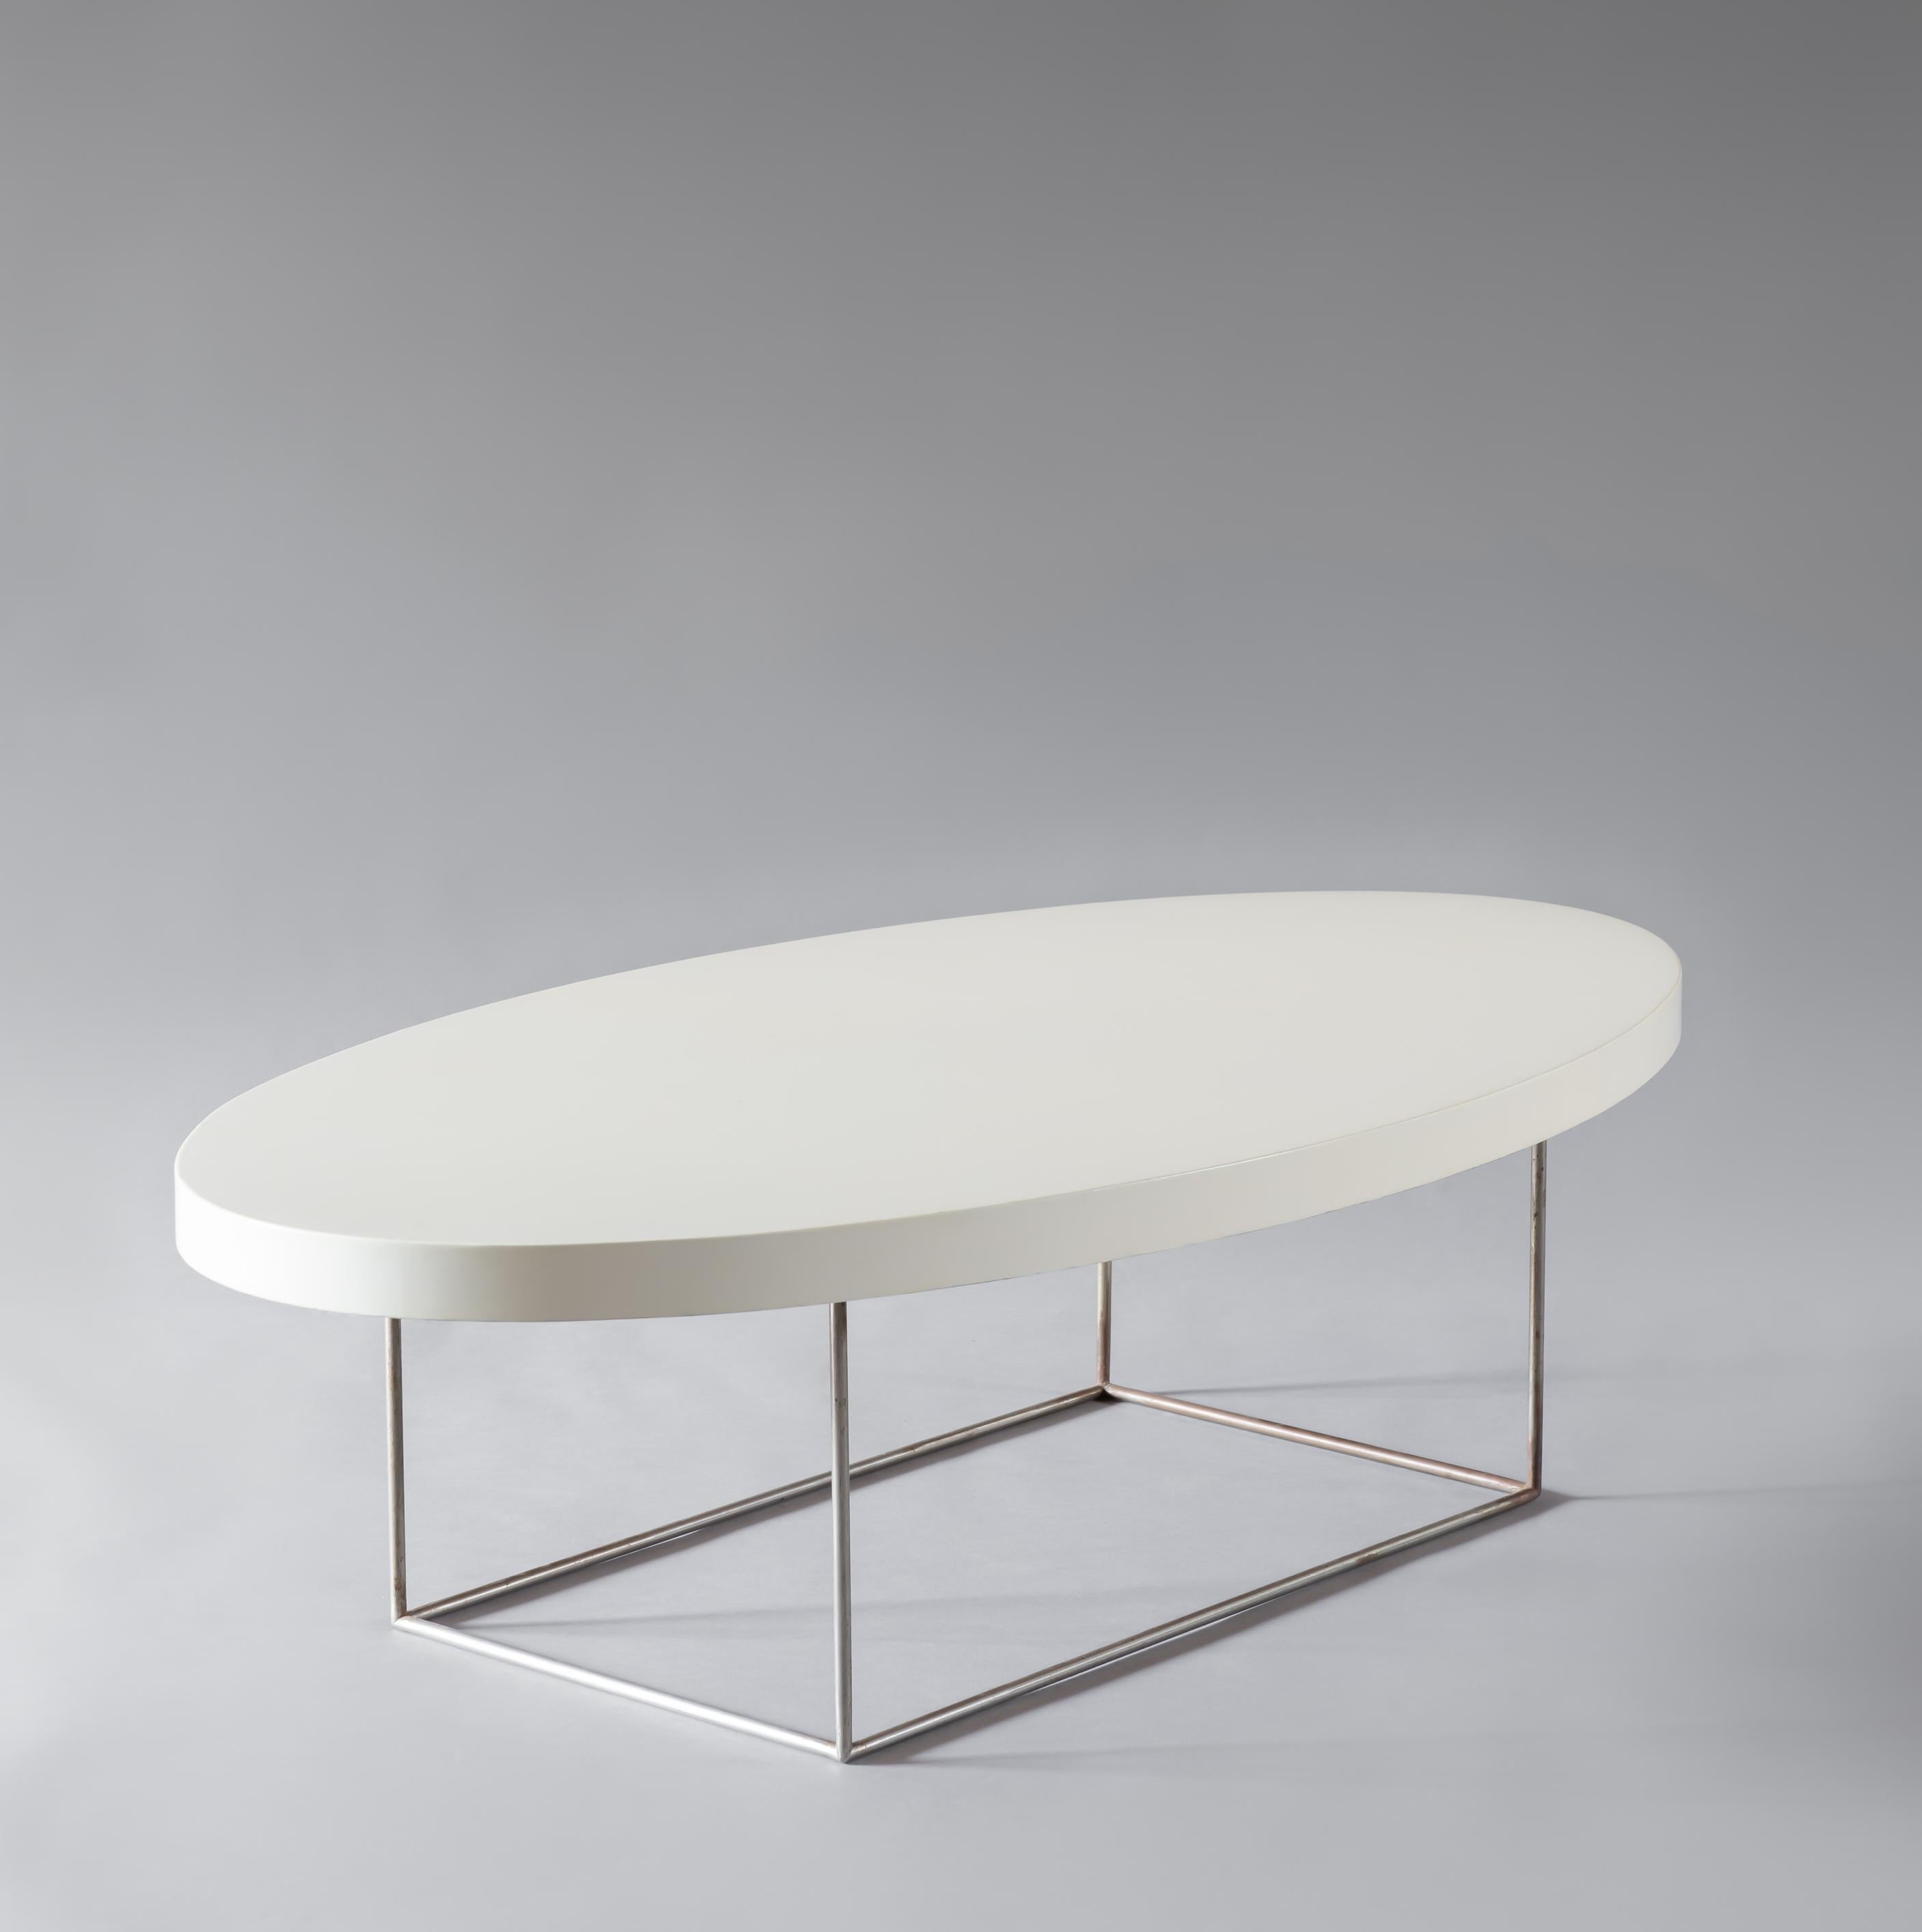 CAILLETTE René-Jean (1919-2004)
Coffee table, Unique piece, made by Charron, circa 1962
Nickel-plated metal, white lacquered plywood oval top
Height 34 x Length 120 x Depth 65 cm

History :
The designer's personal table, made for his Paris